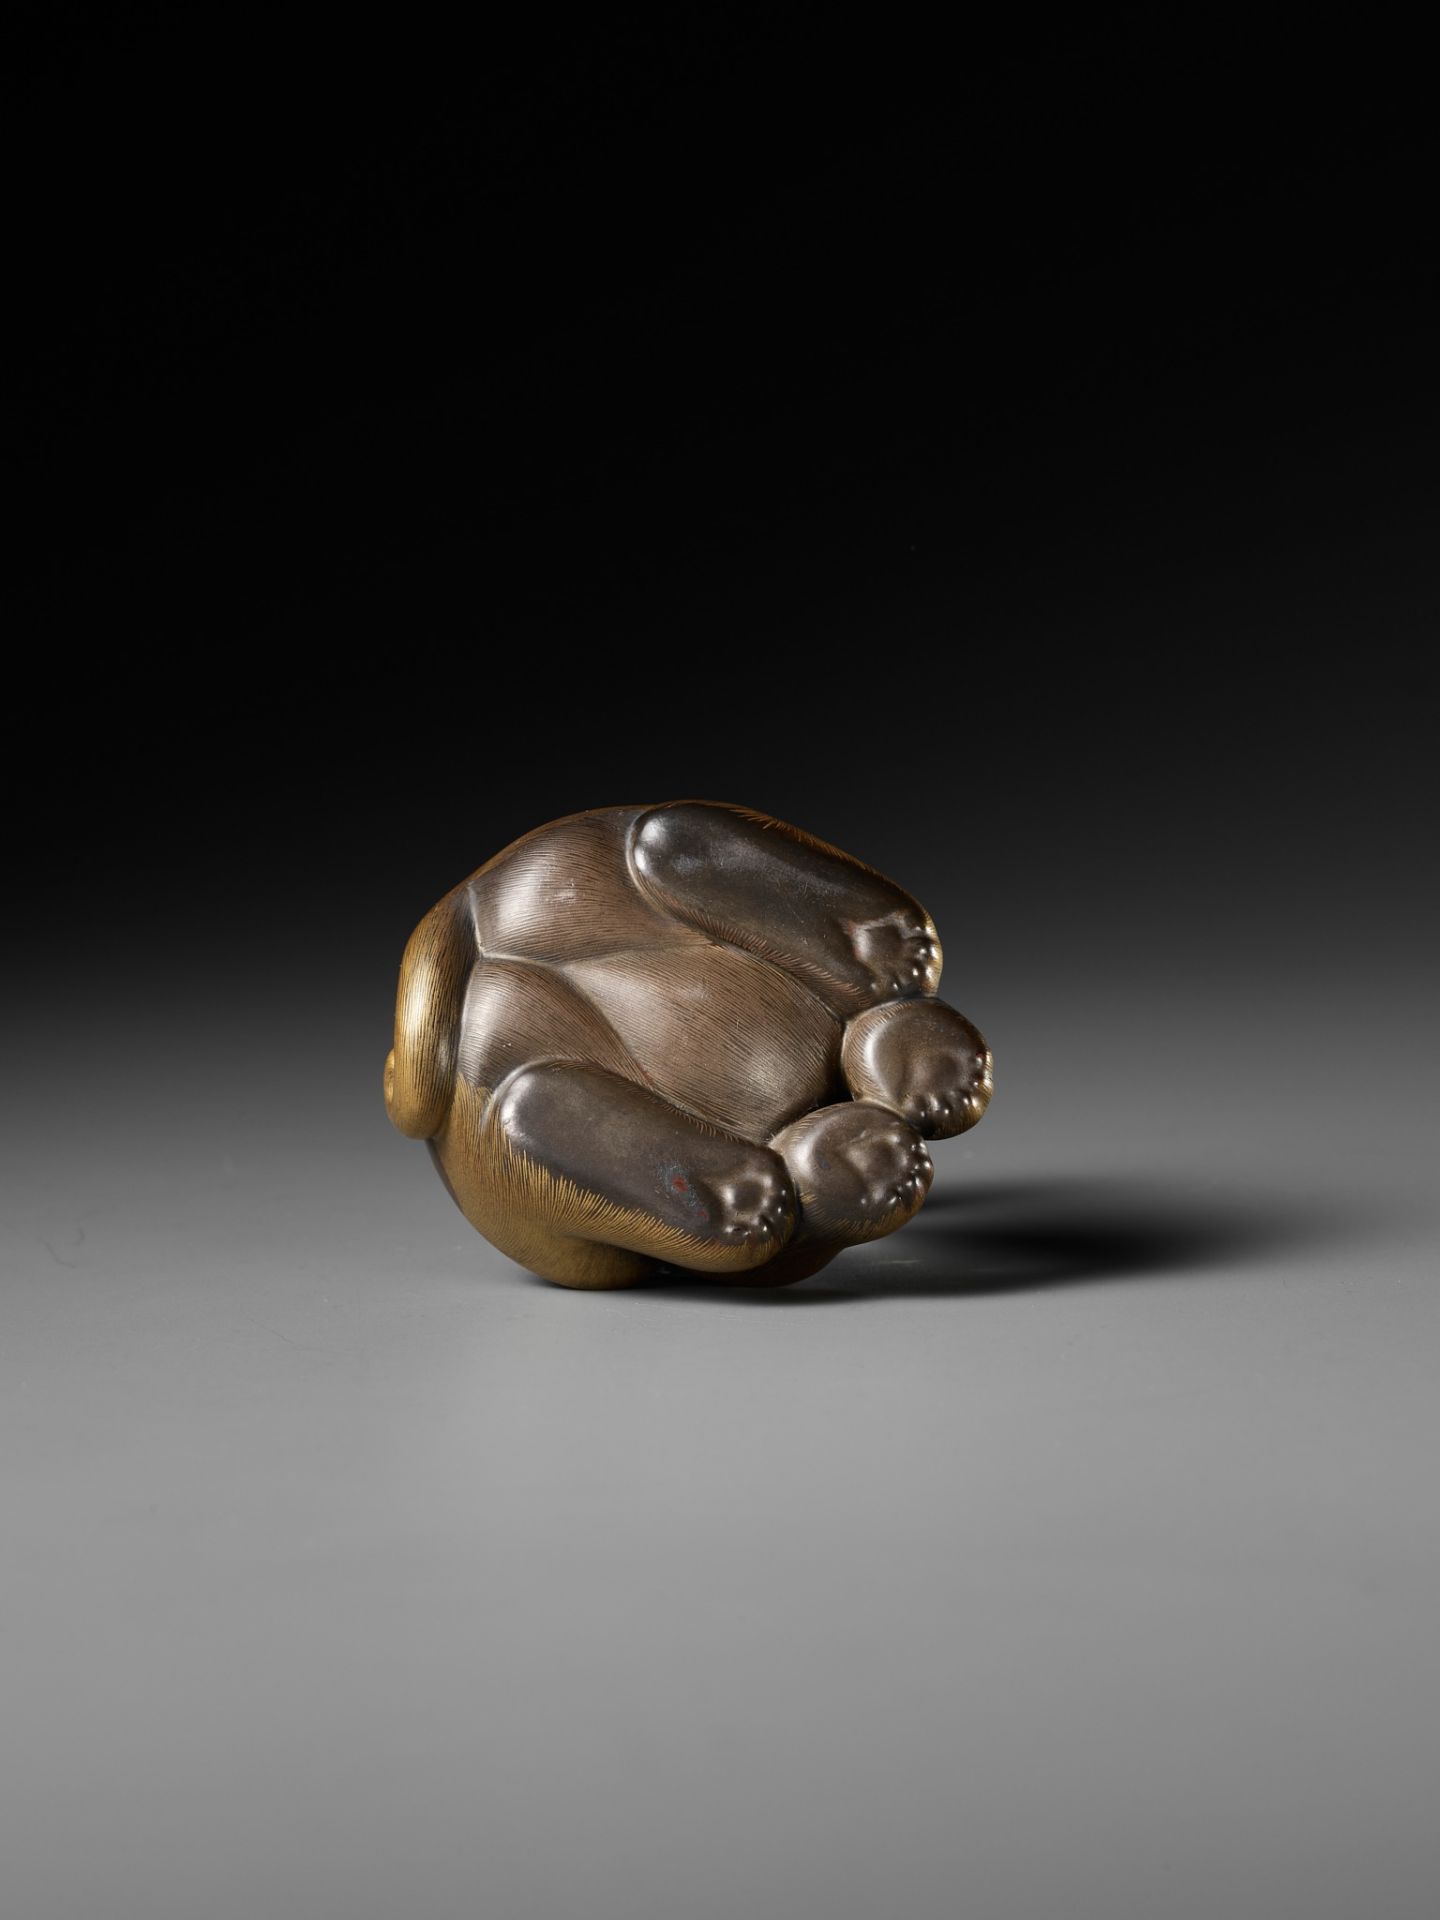 A LACQUER KOGO (INCENSE BOX) AND COVER IN THE FORM OF A PUPPY - Image 9 of 10